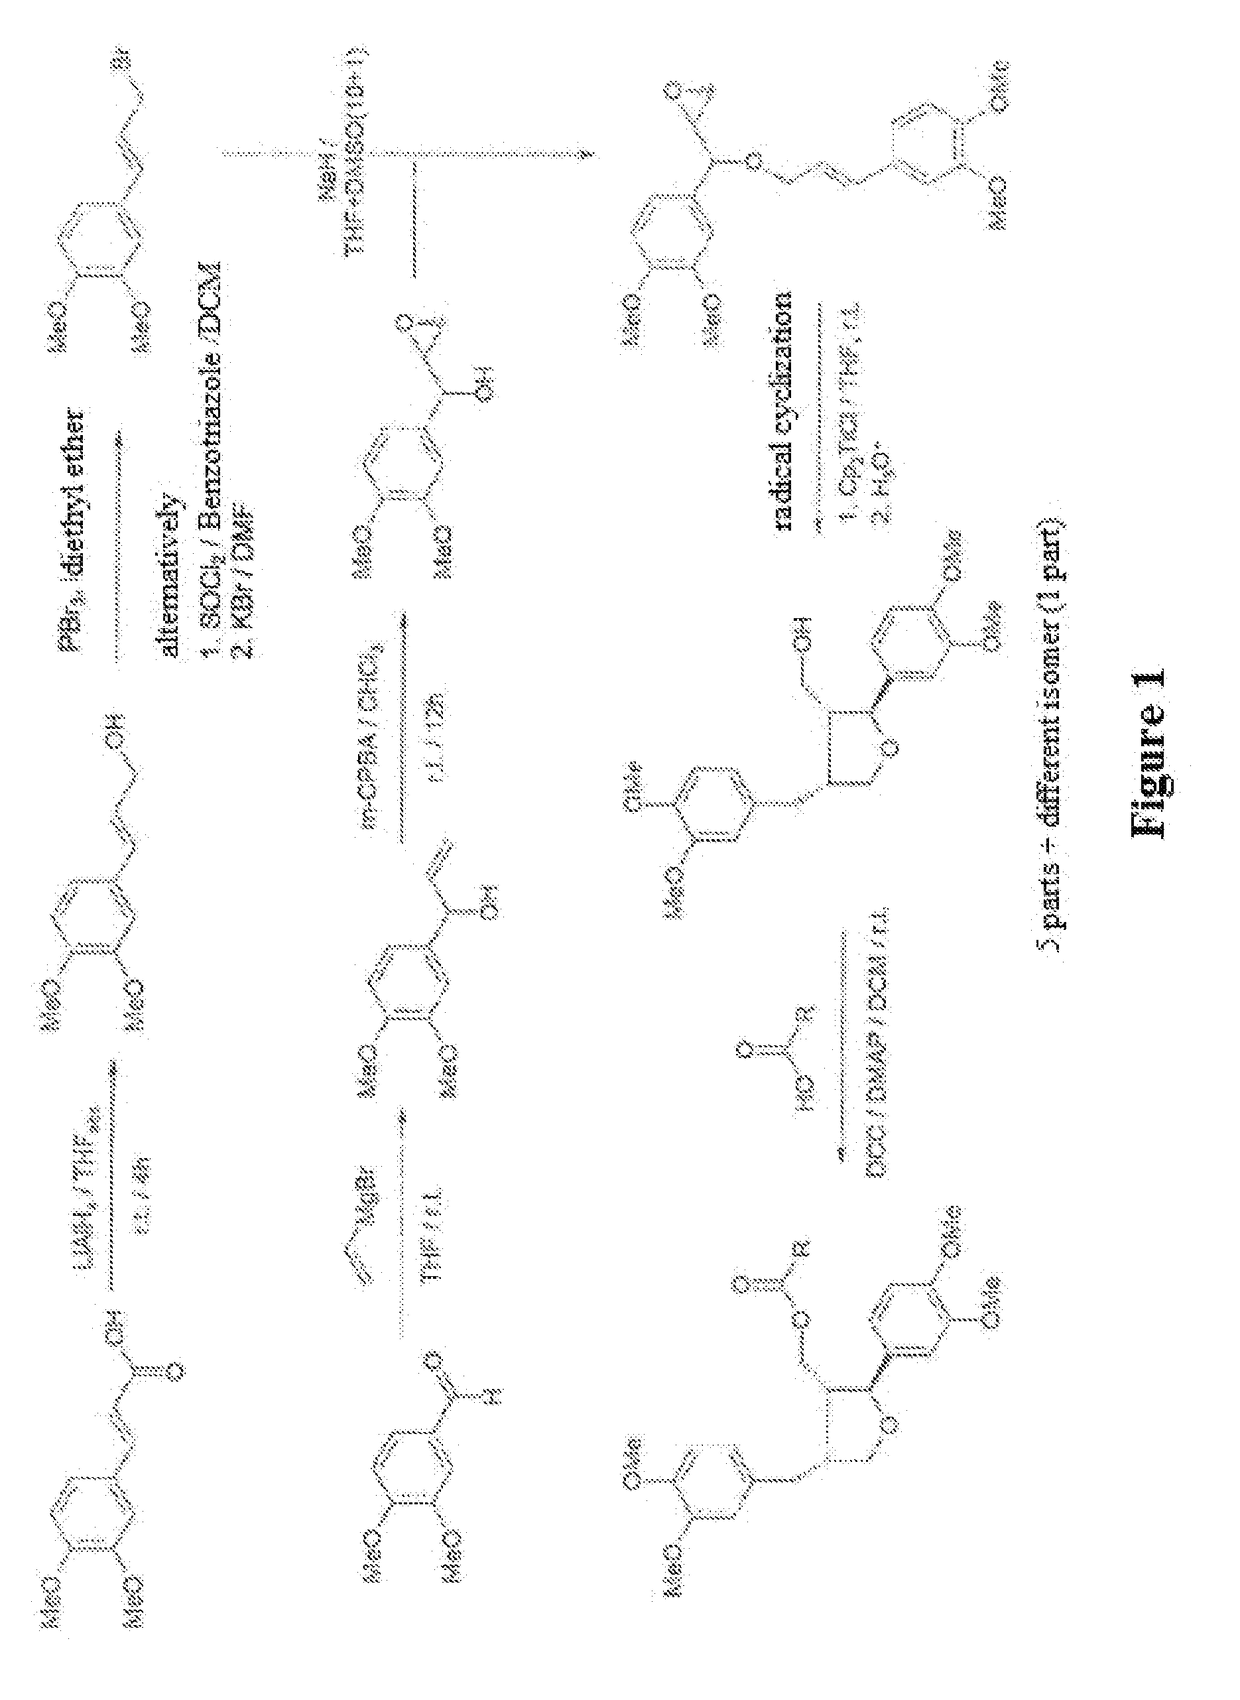 Leoligin derivatives as smooth muscle cell proliferation inhibitors